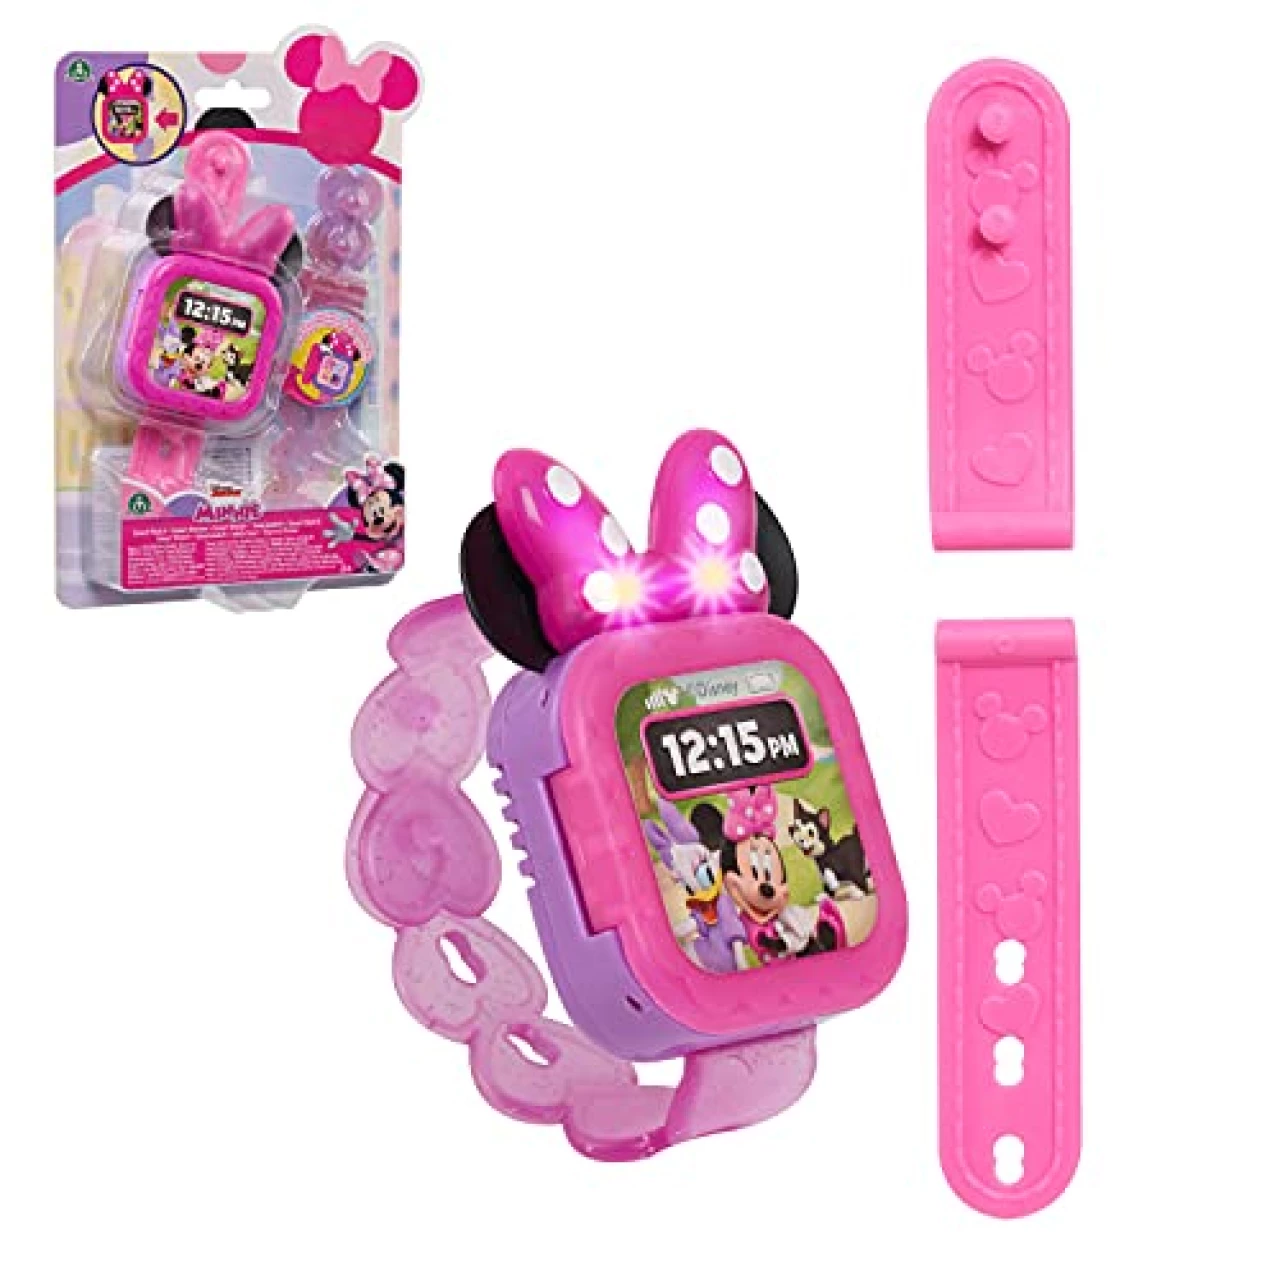 Disney Junior Minnie Mouse Play Smart Watch with Lights and Sounds, 3-pieces, Kids Toys for Ages 3 Up by Just Play